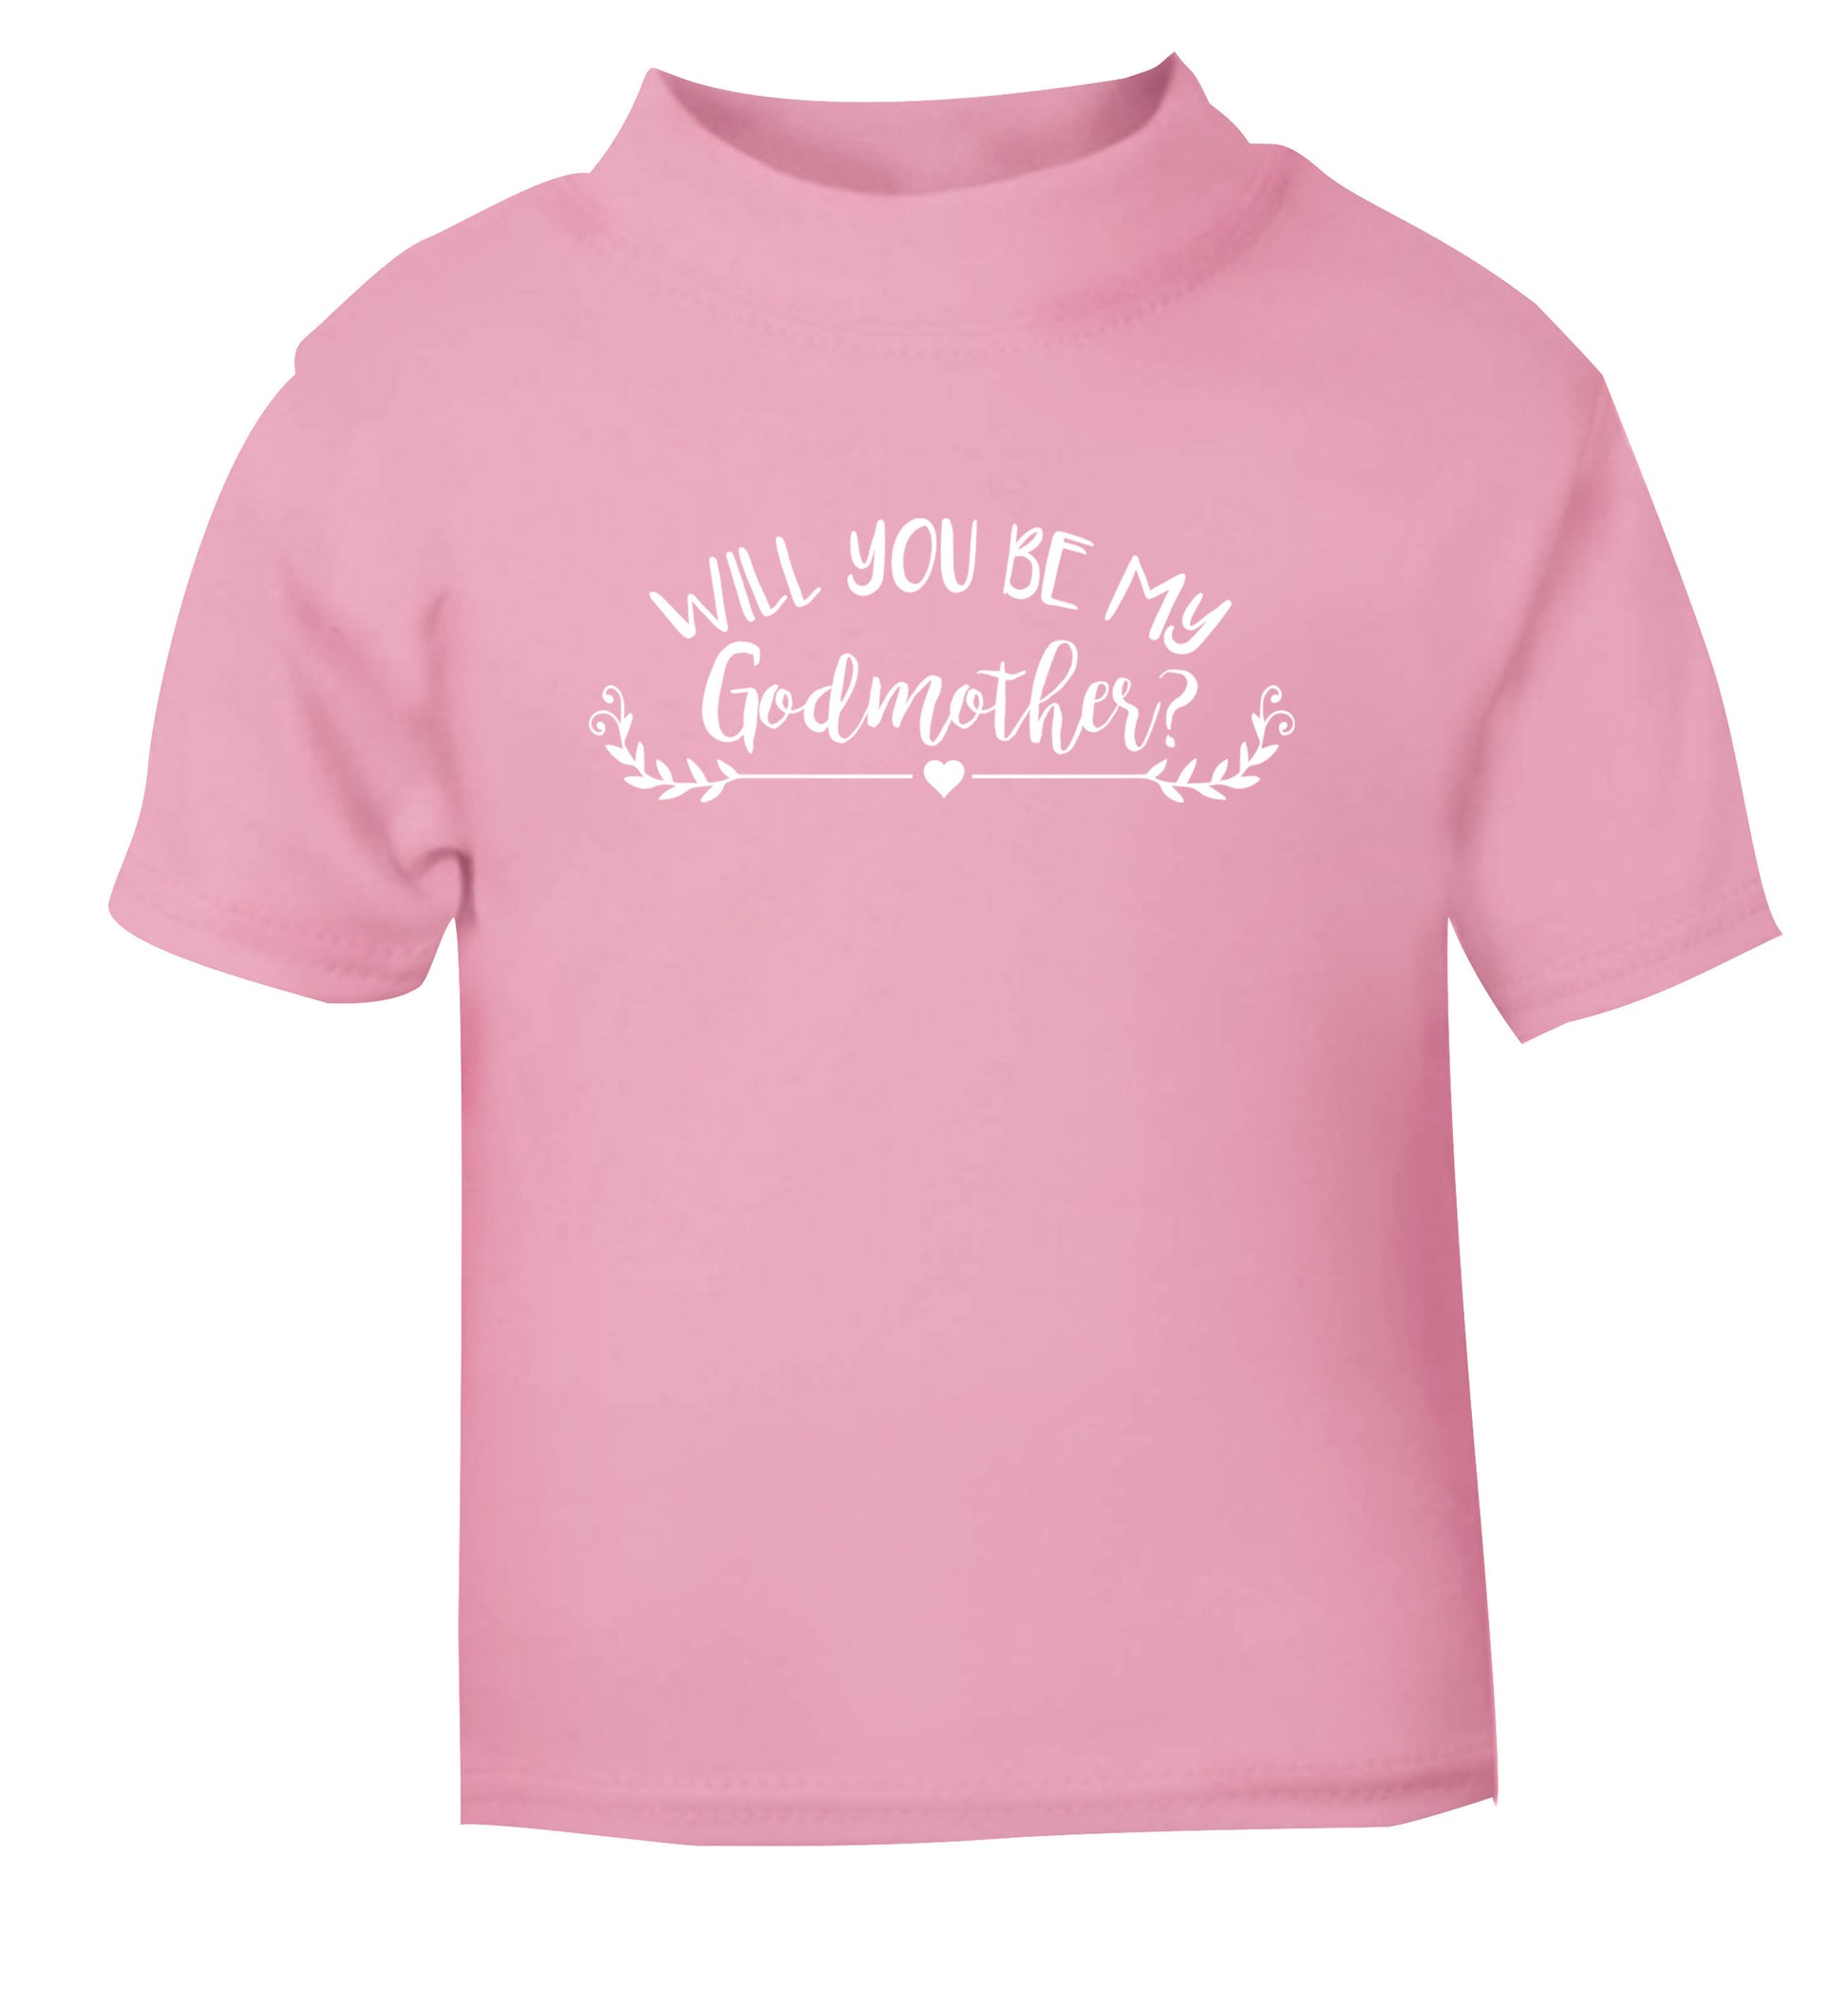 Will you be my godmother? light pink Baby Toddler Tshirt 2 Years